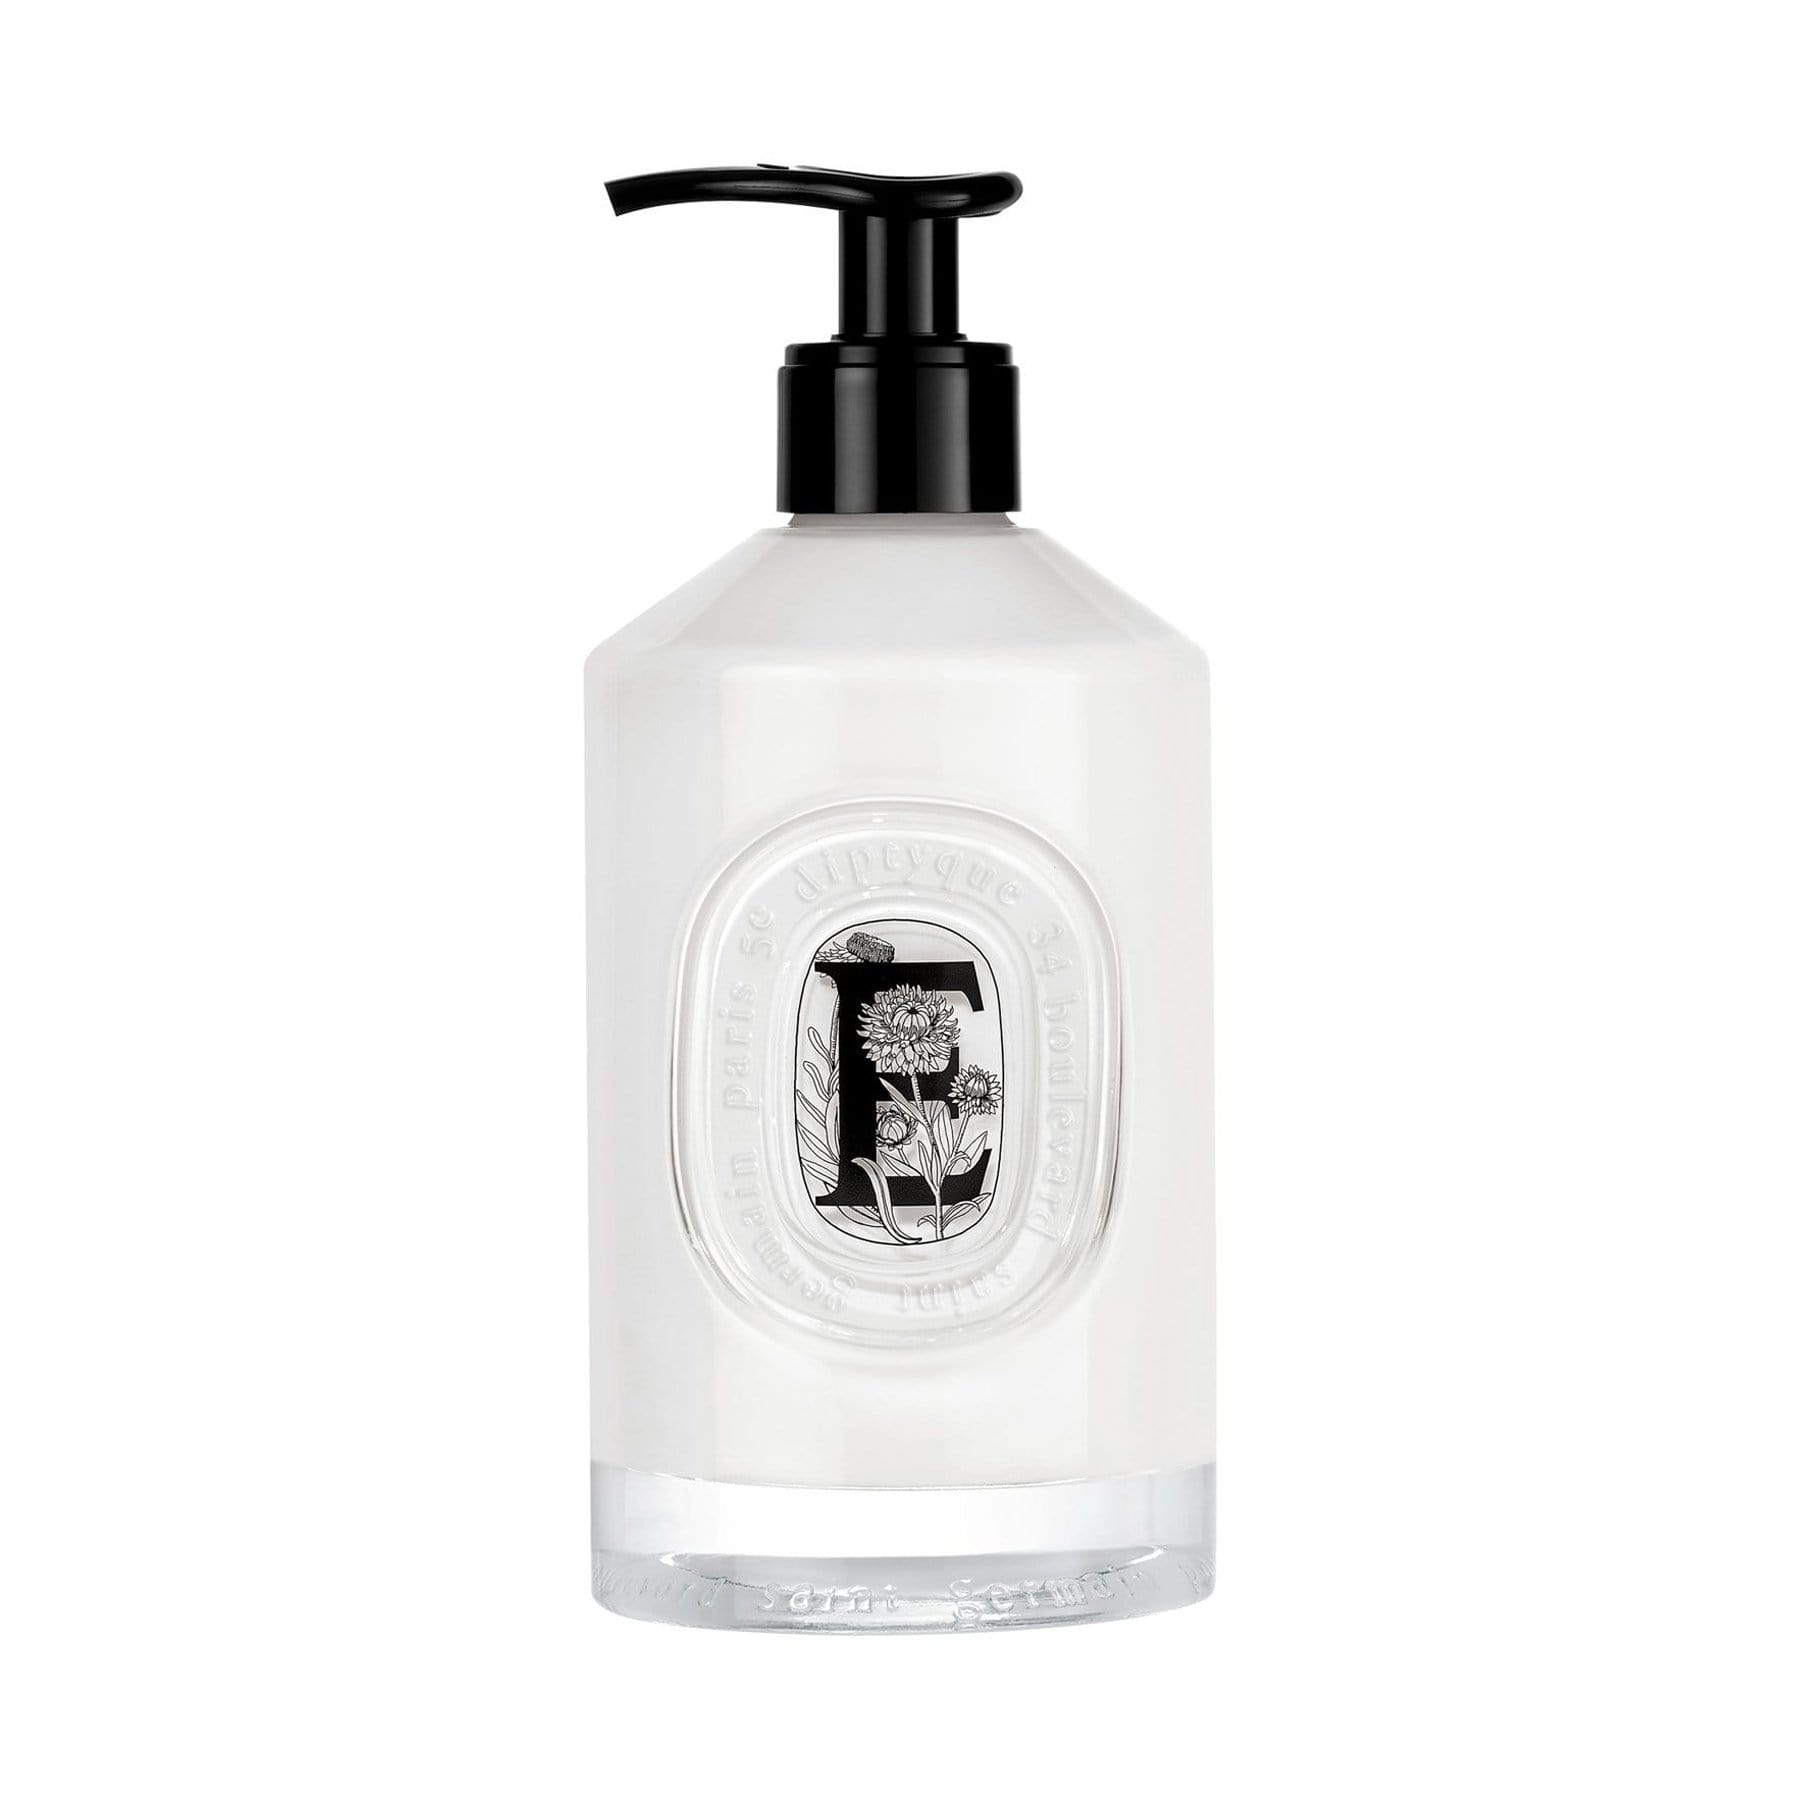 Diptyque velvety hand lotion